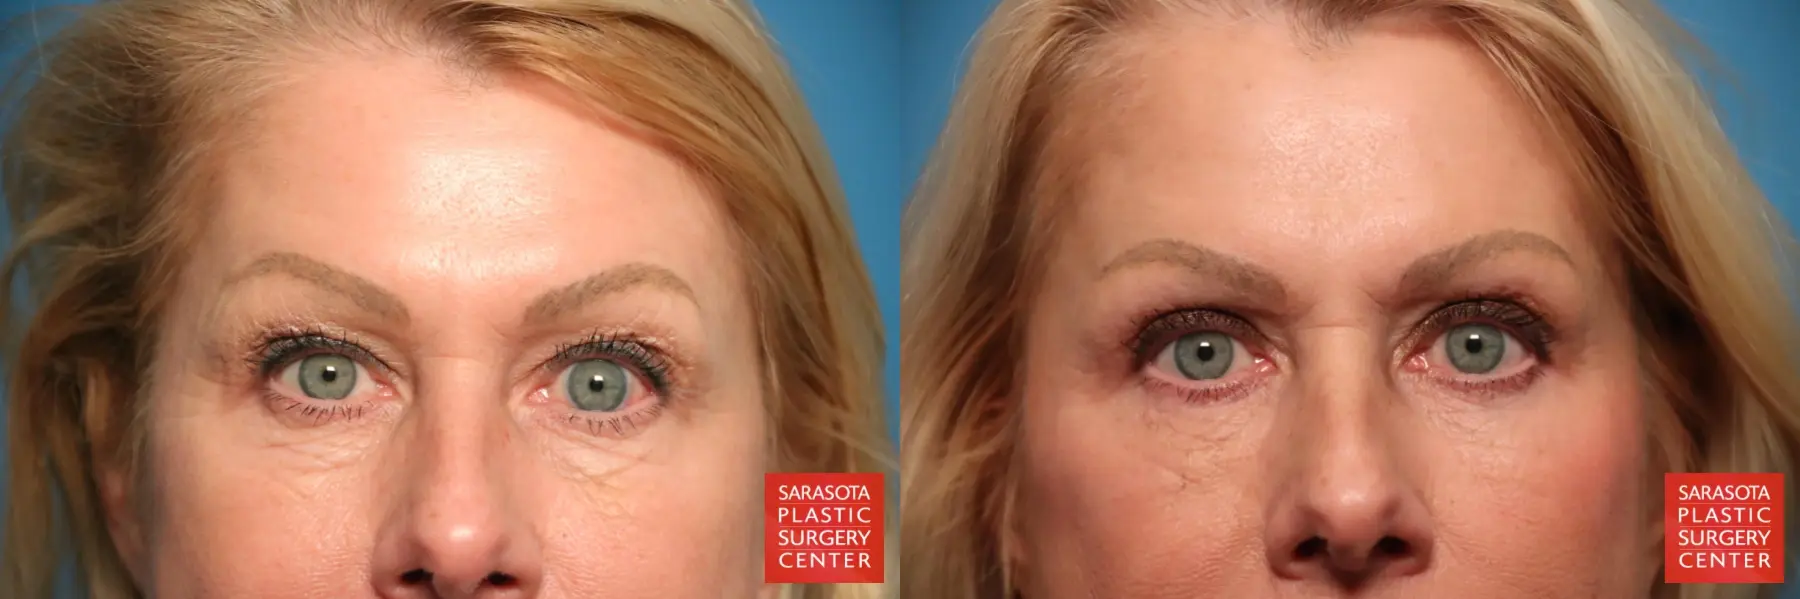 Eyelid Lift: Patient 59 - Before and After 1